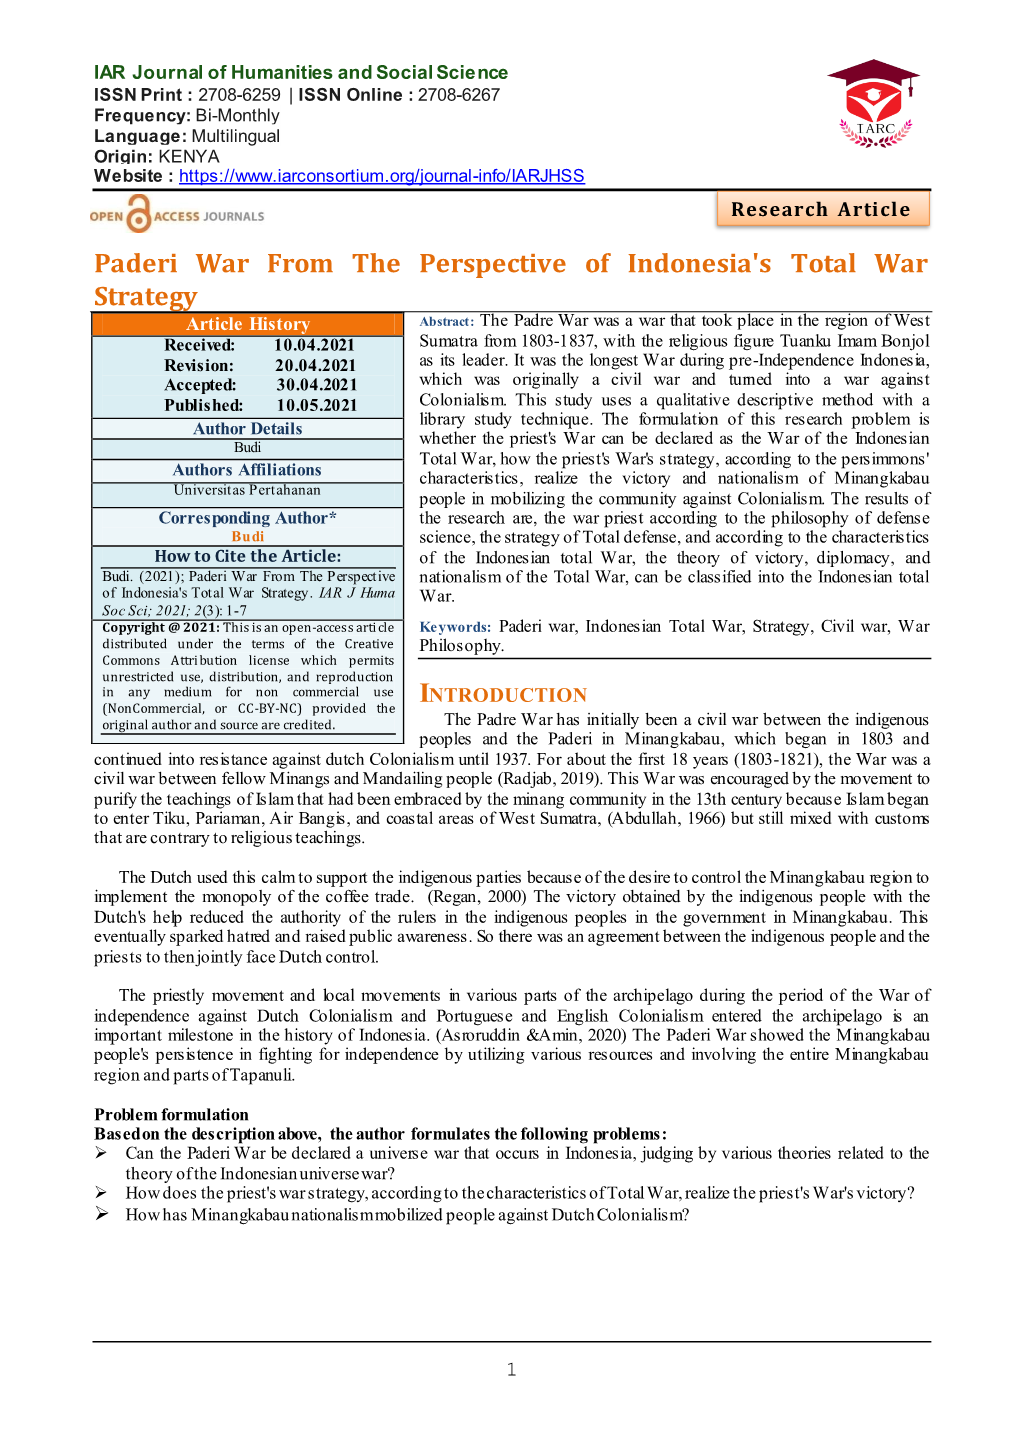 Paderi War from the Perspective of Indonesia's Total War Strategy